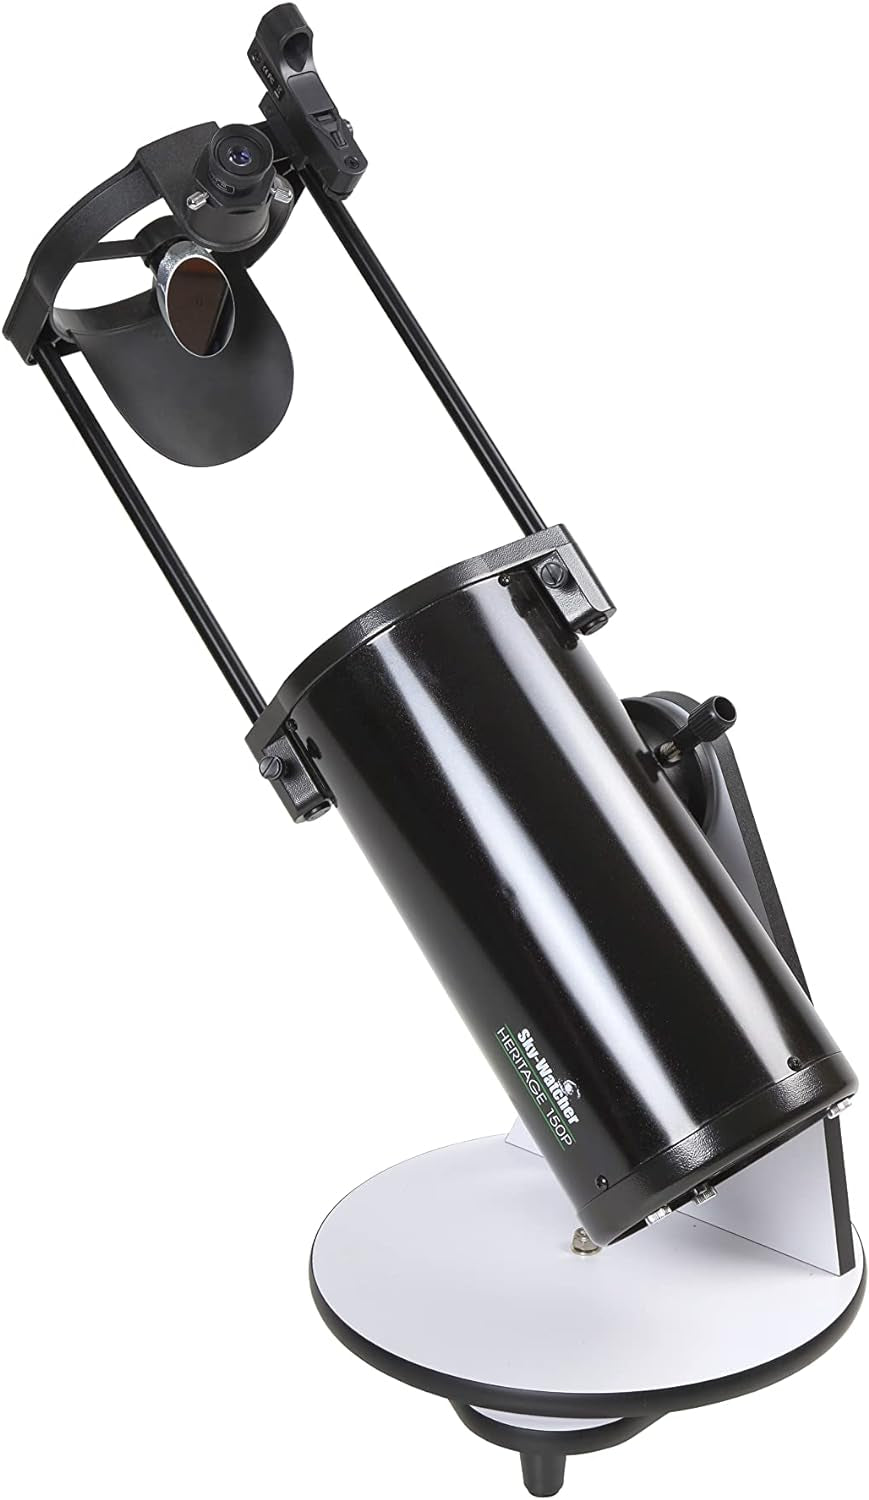 Heritage 150 Tabletop Dobsonian Telescope - Perfect for Beginners, Easy Setup, Portable, and Fun (S11710)